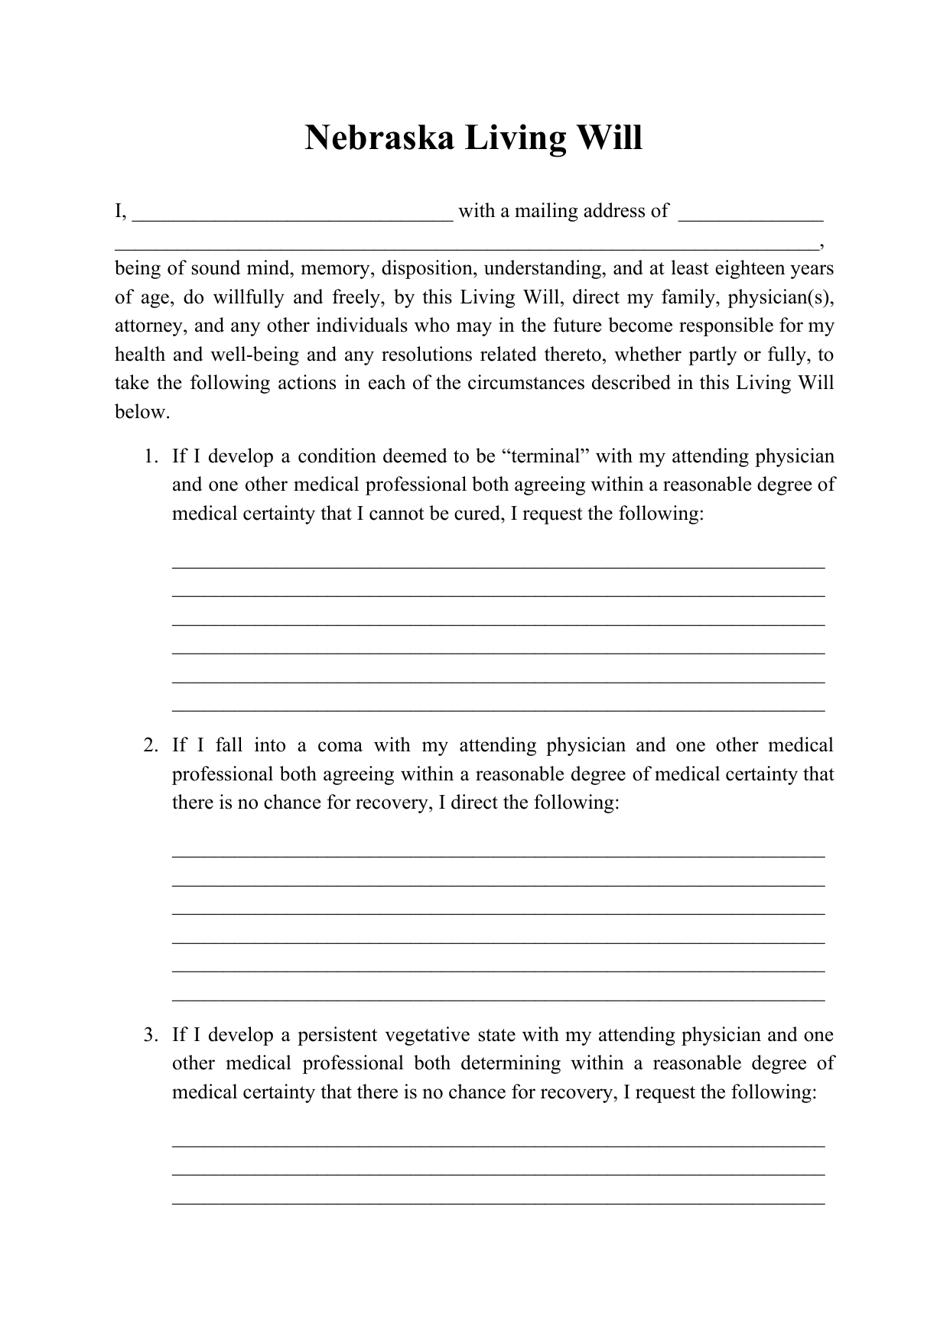 nebraska-living-will-form-fill-out-sign-online-and-download-pdf